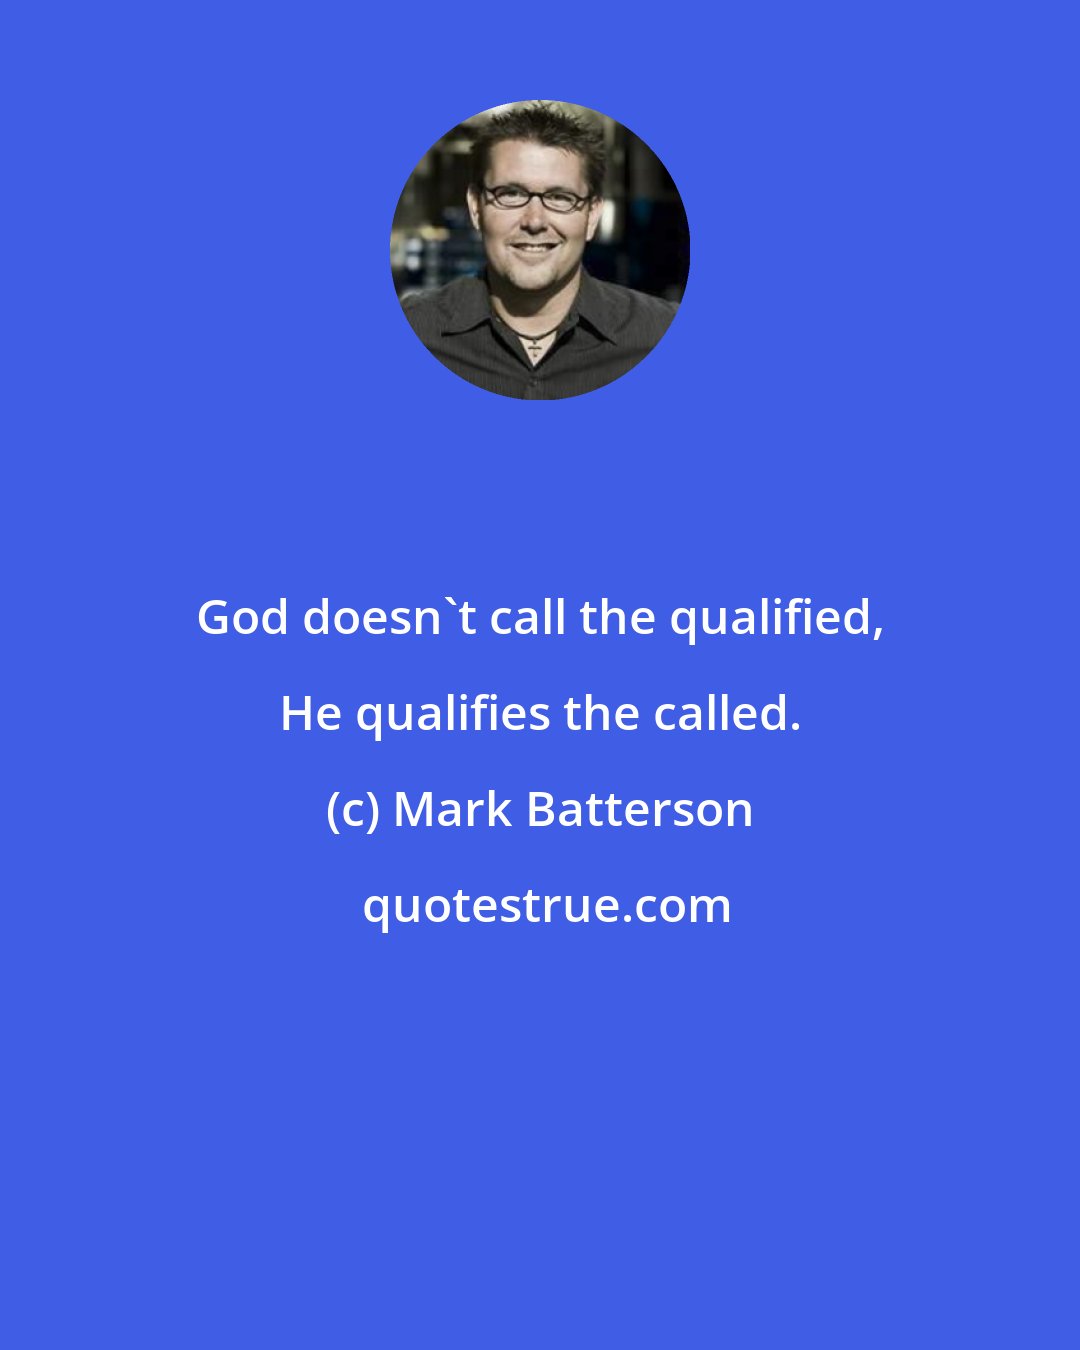 Mark Batterson: God doesn't call the qualified, He qualifies the called.